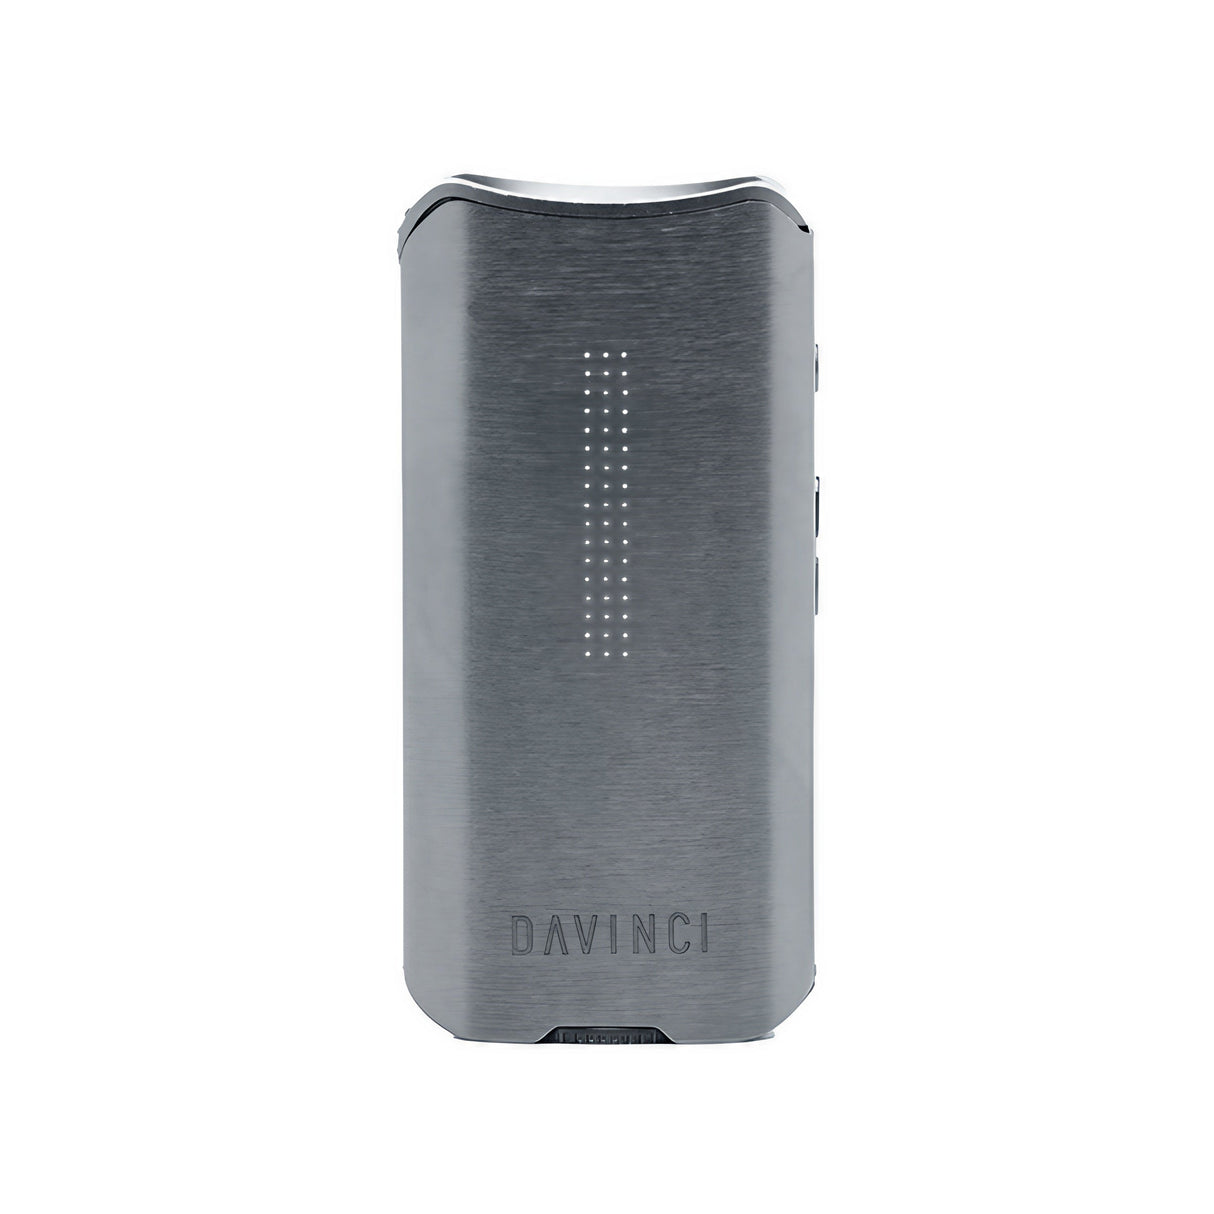 DaVinci IQ2 Vaporizer front view, compact and portable design for dry herbs and concentrates